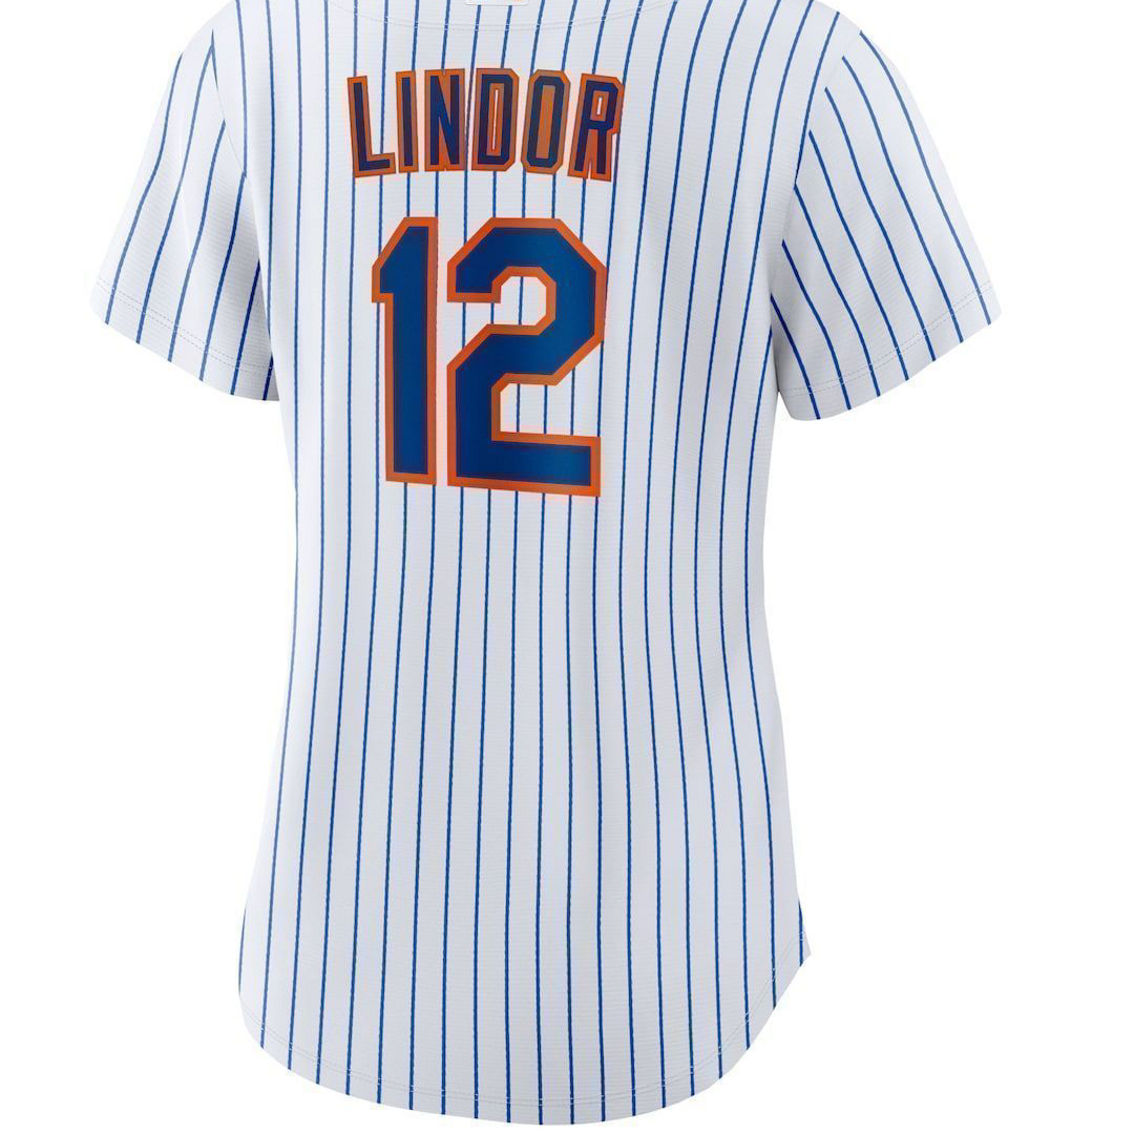 Nike Women's Francisco Lindor White New York Mets Home Replica Player Jersey - Image 4 of 4